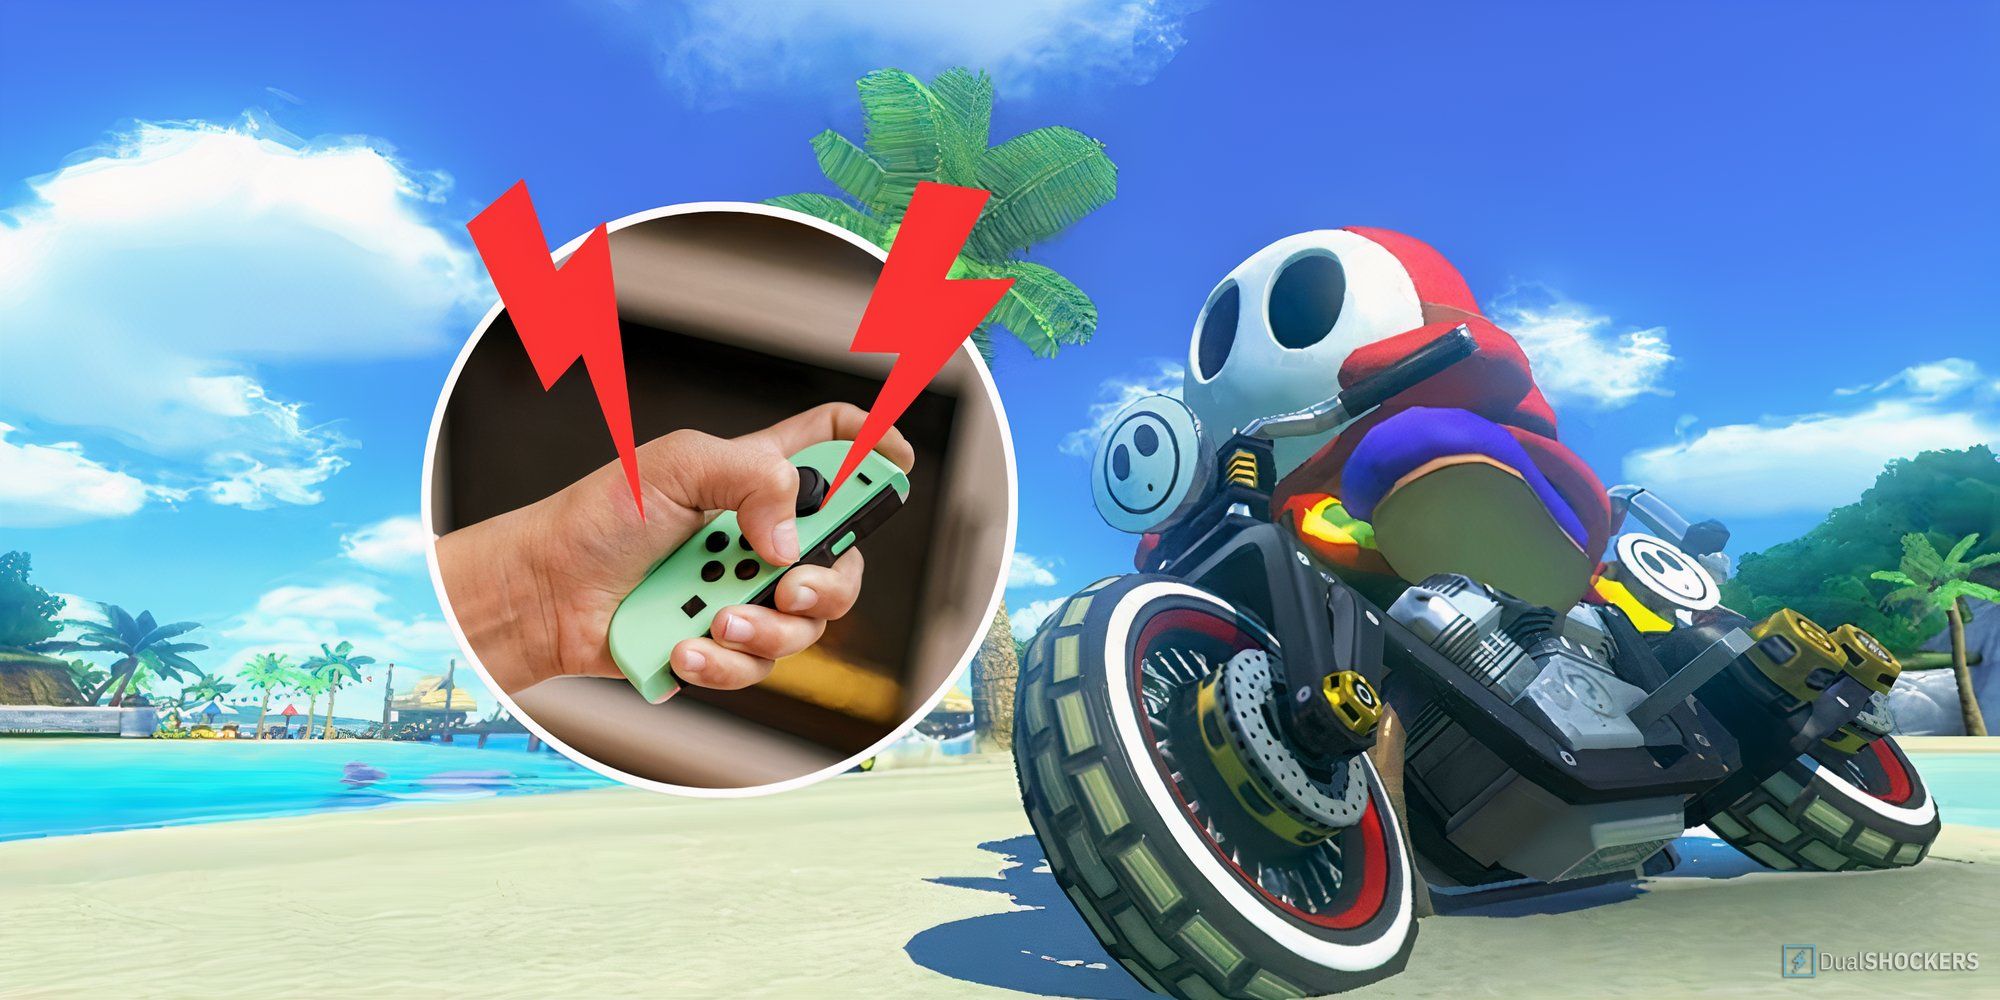 Feature image with Shy Guy from Mario Kart 8 on a bike riding along the beach next to a circle image of a hand holding a Joy-Con.